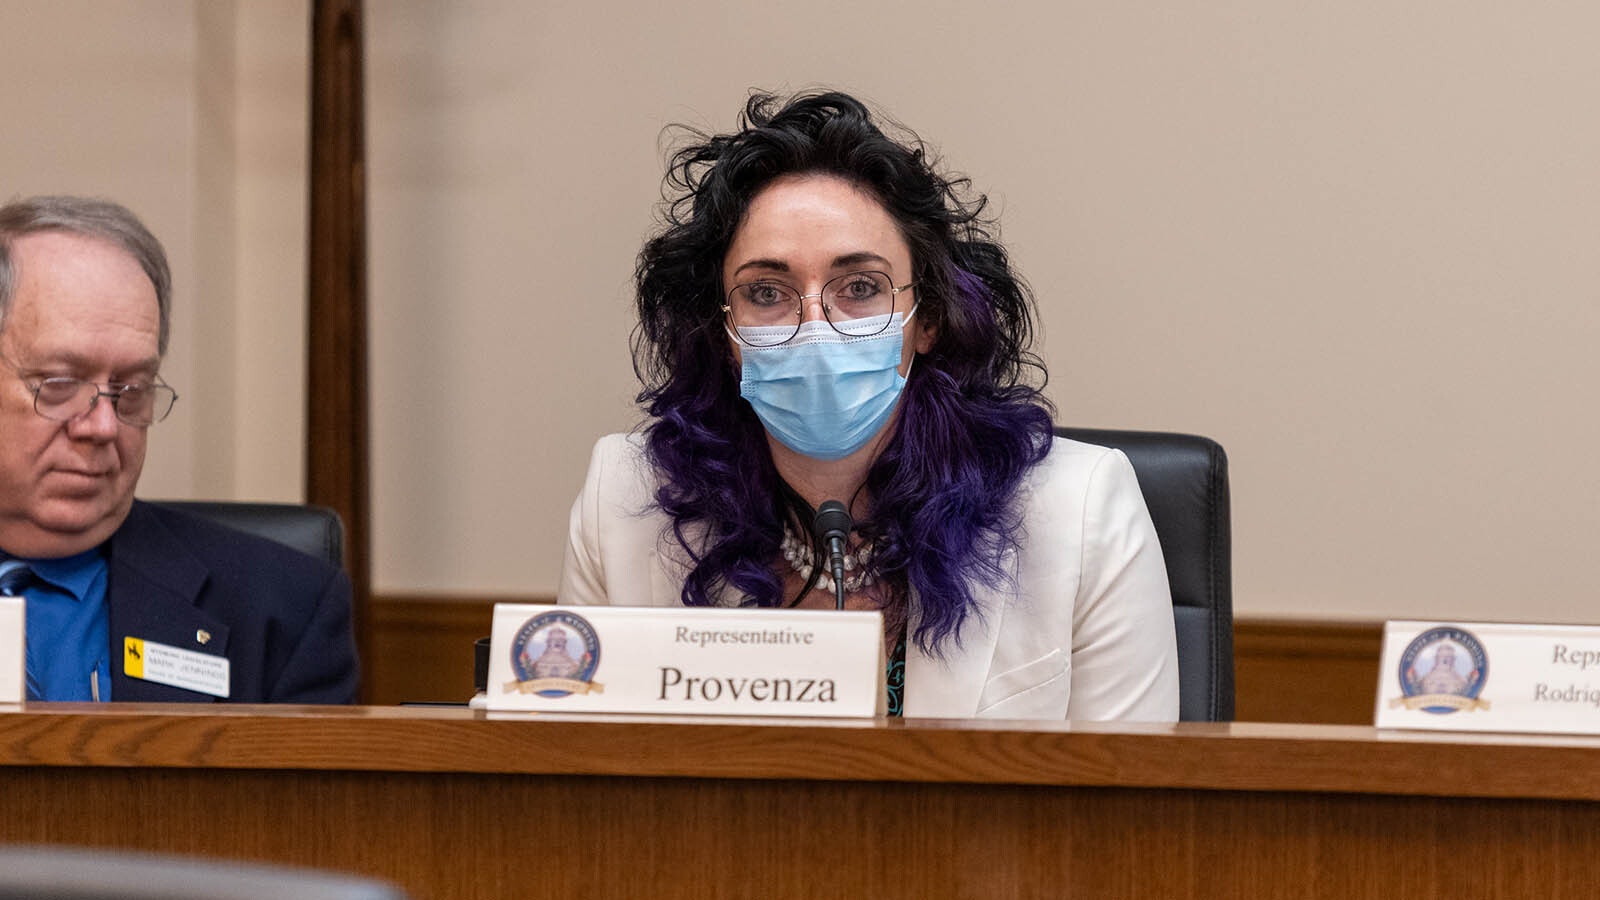 Rep. Karlee Provenza, D-Laramie, during Monday's House Judiciary Committee meeting.